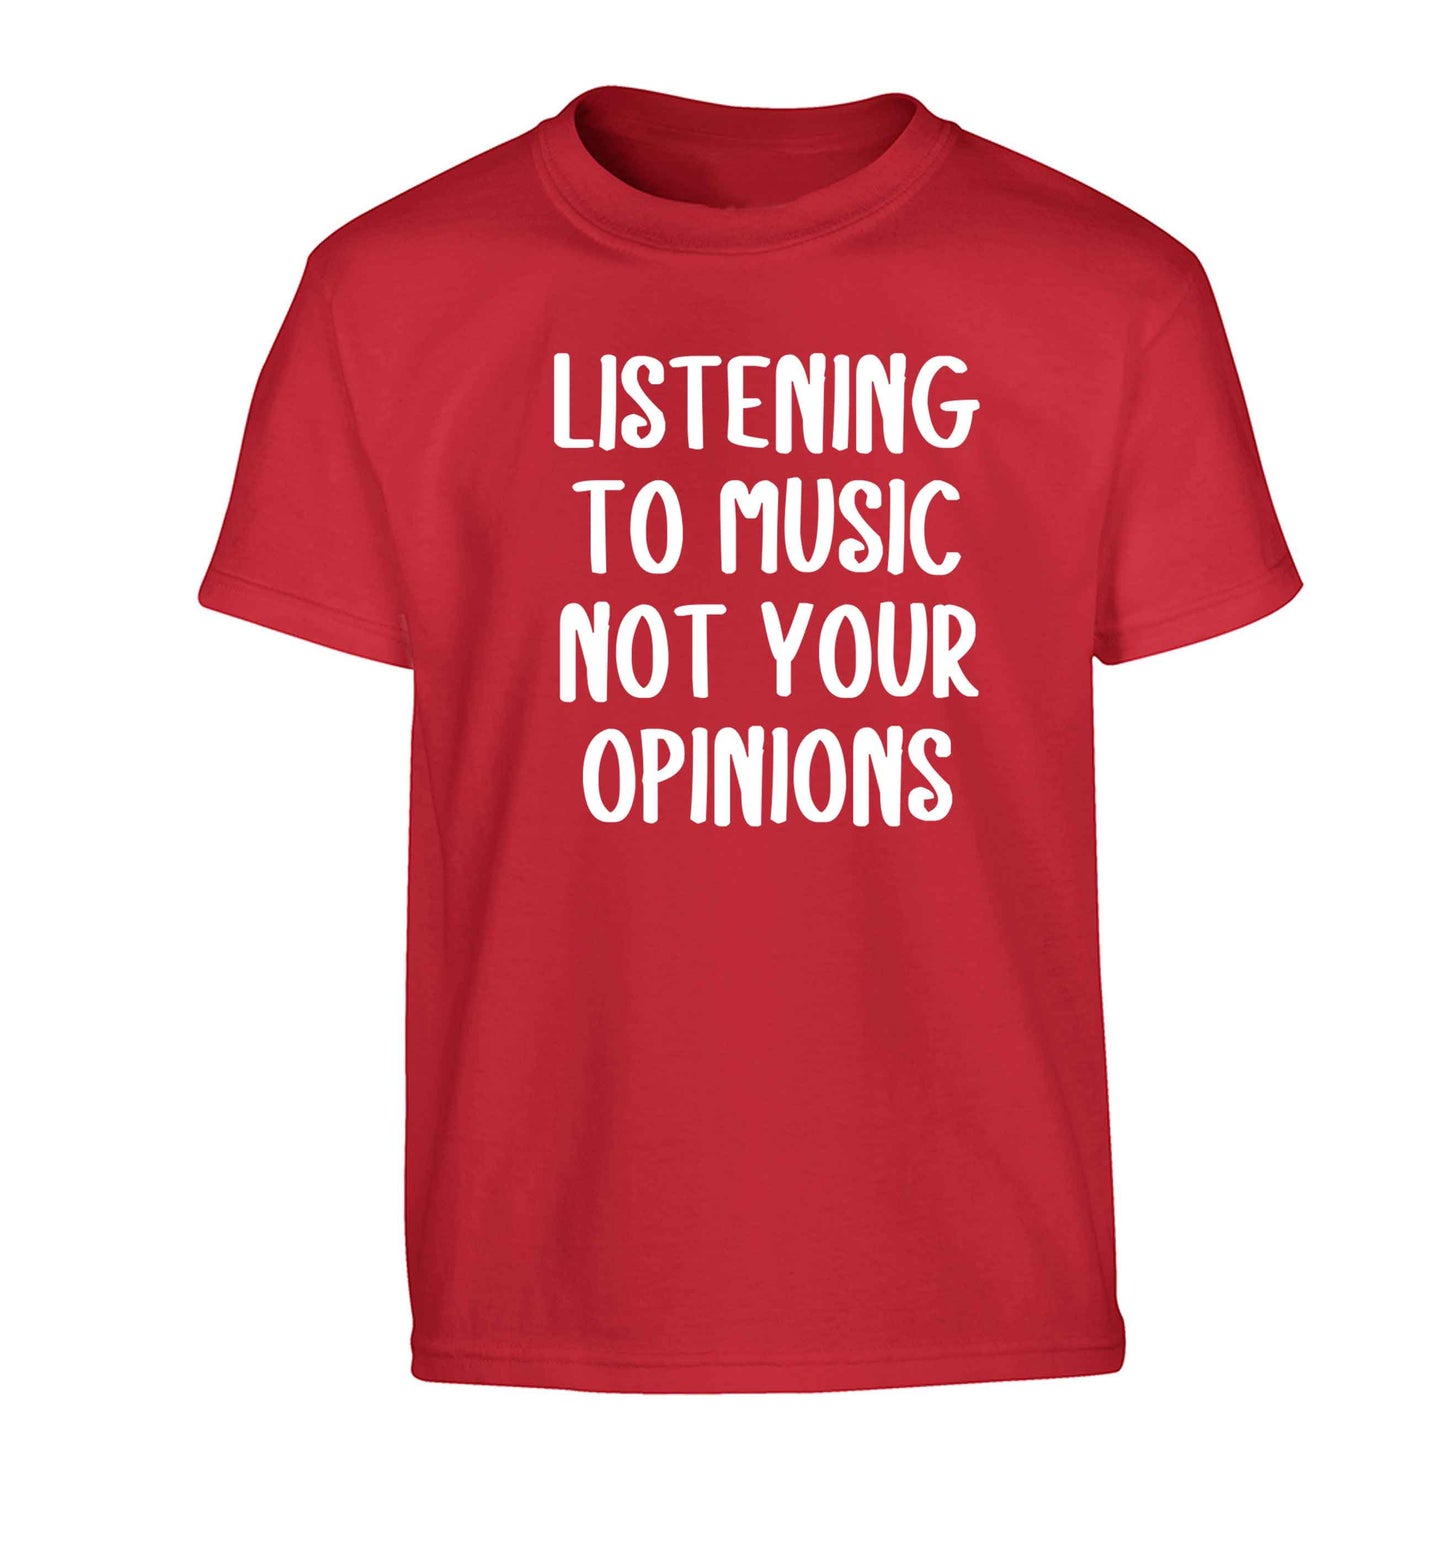 Listening to music not your opinions Children's red Tshirt 12-13 Years